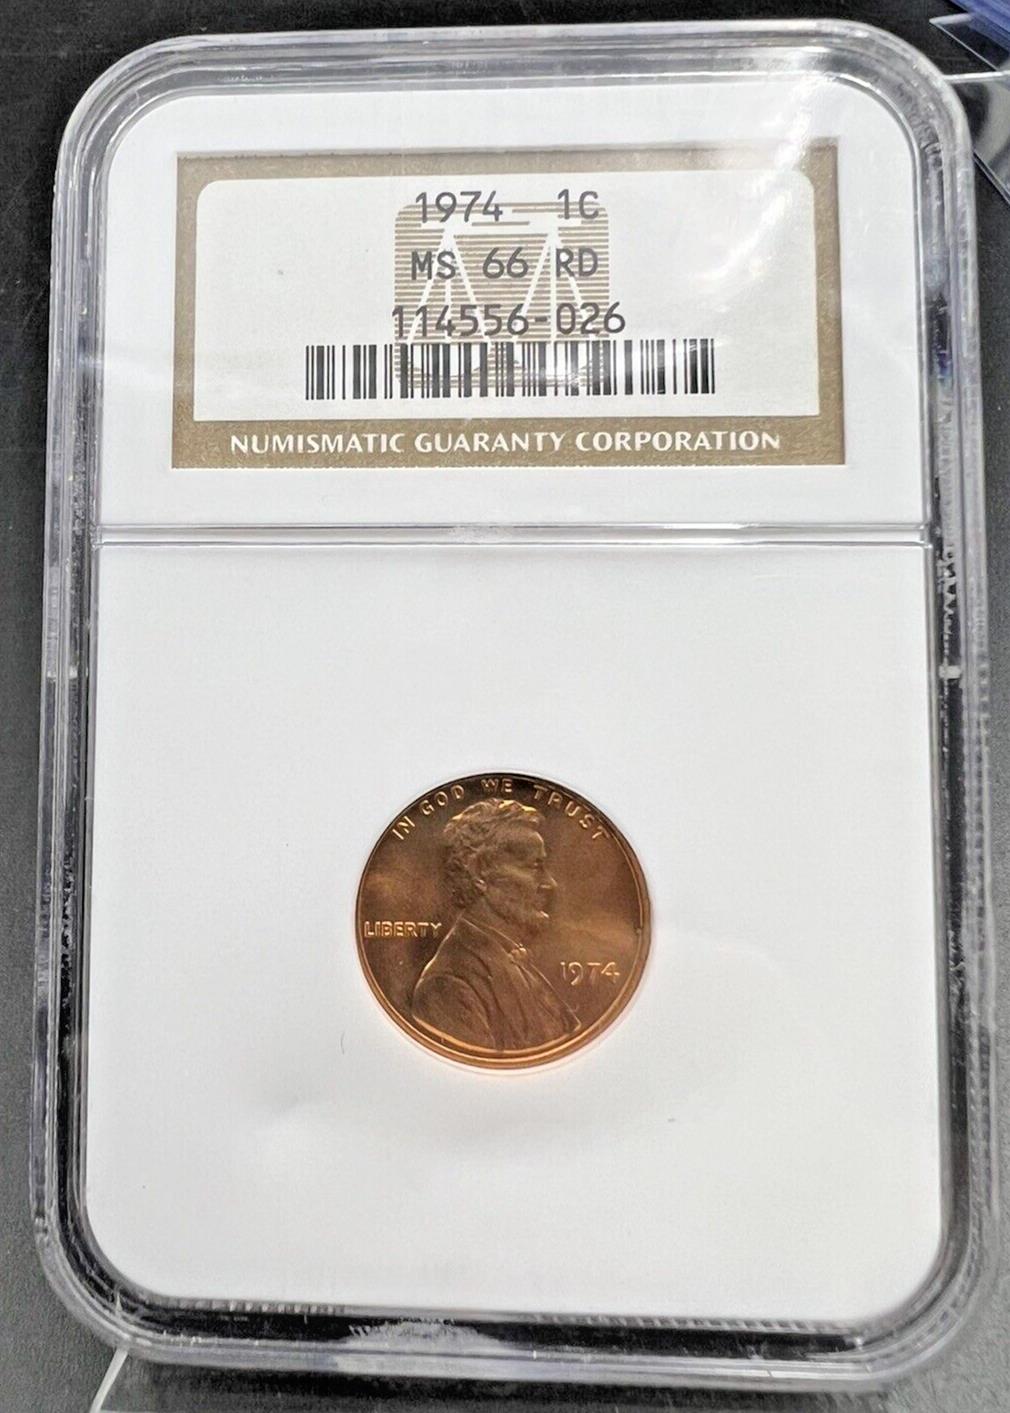 1974 P Lincoln Memorial Cent Penny Coin NGC MS66 RD Gem BU Certified